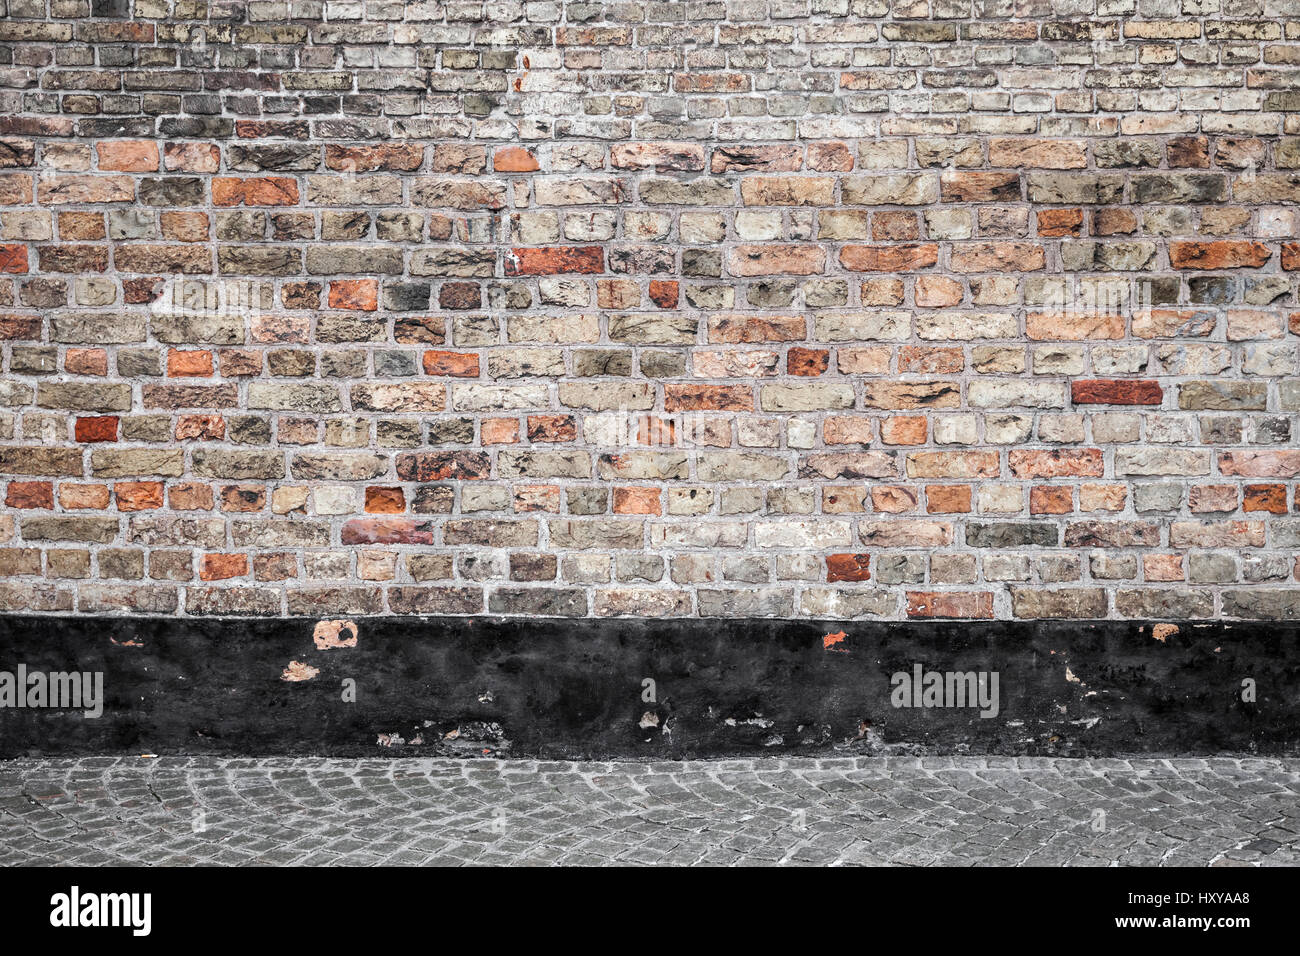 Abstract empty urban interior background with red brick wall and ...